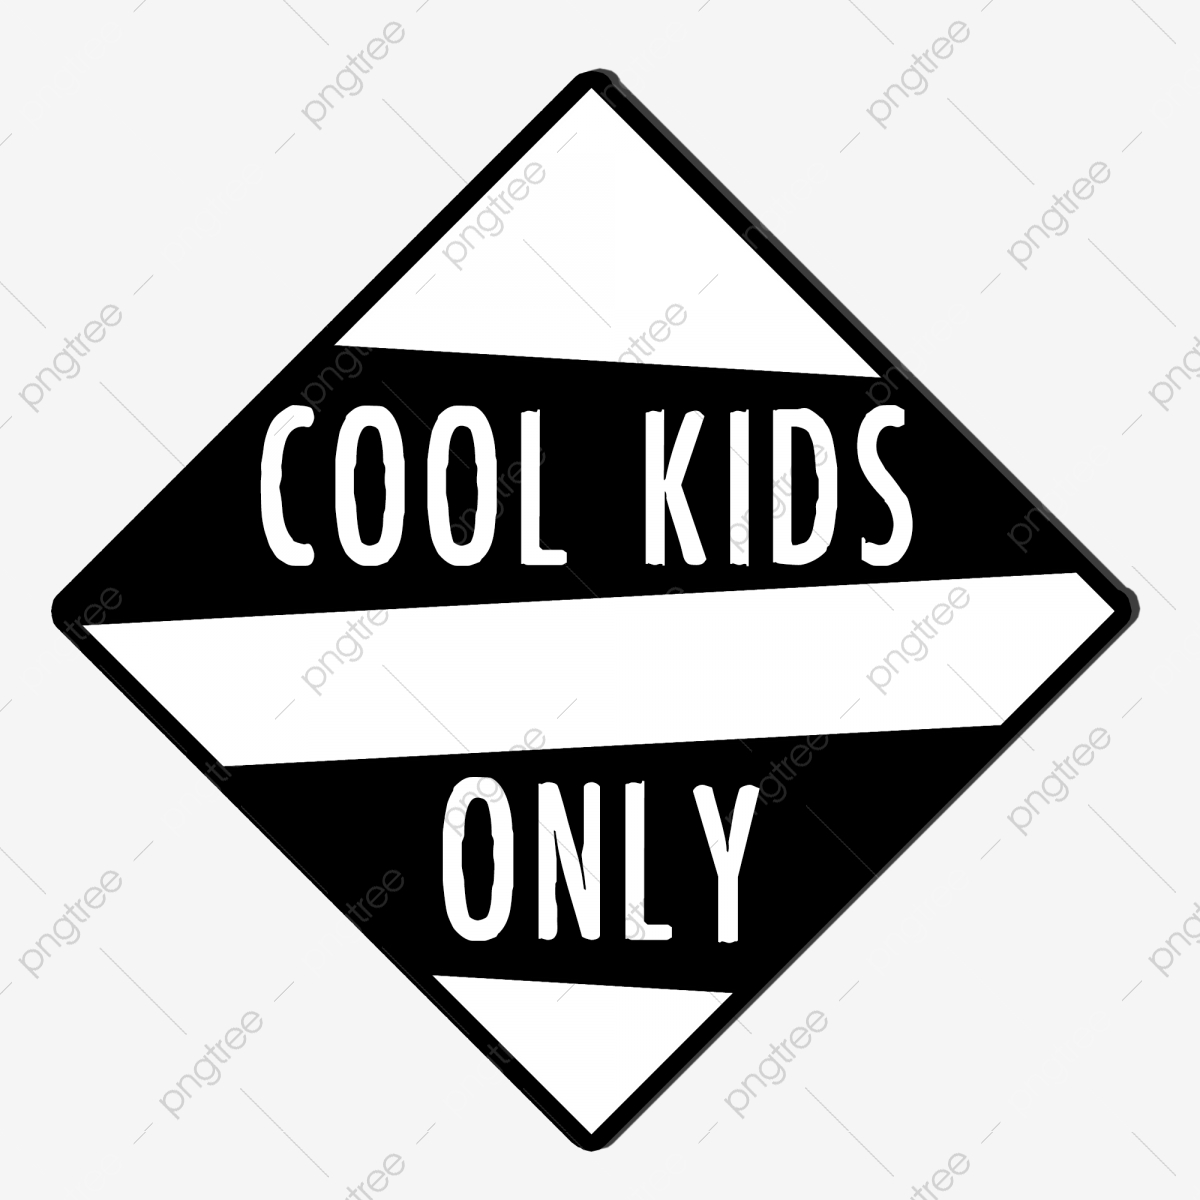 Cool Kids Only, Cool, Only, Graphic PNG Transparent Clipart Image.